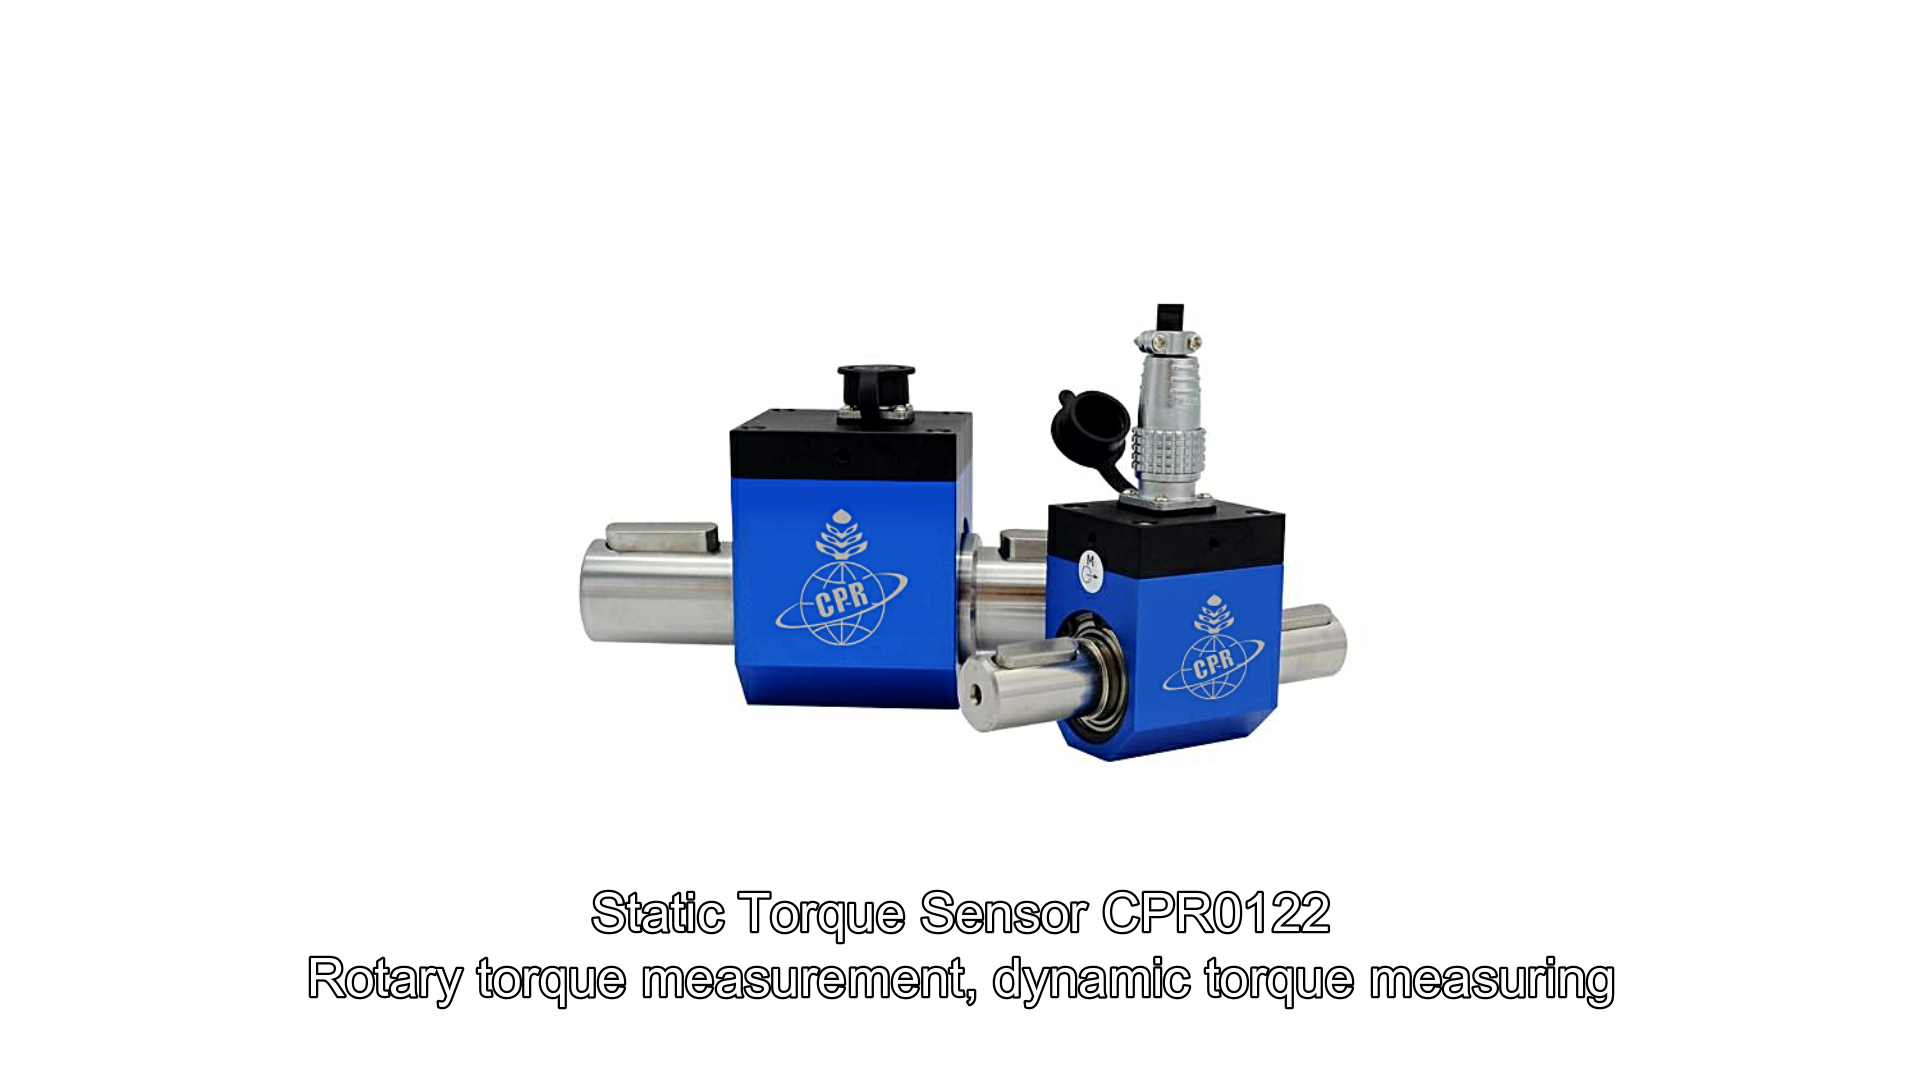 Customized Force Sensor Load Cell Rotary torque measurement dynamic torque measuring Micro Sensor CPR-0150 manufacturers FromChina